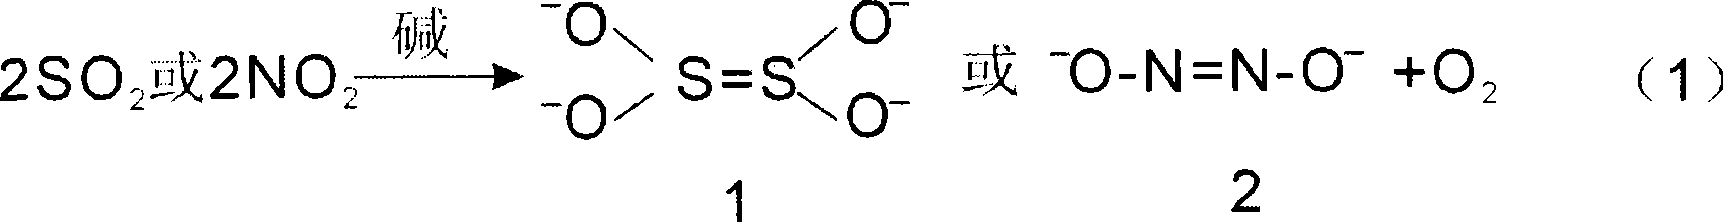 Organic matter synthesized by raw materials CO2 and H2O and application thereof